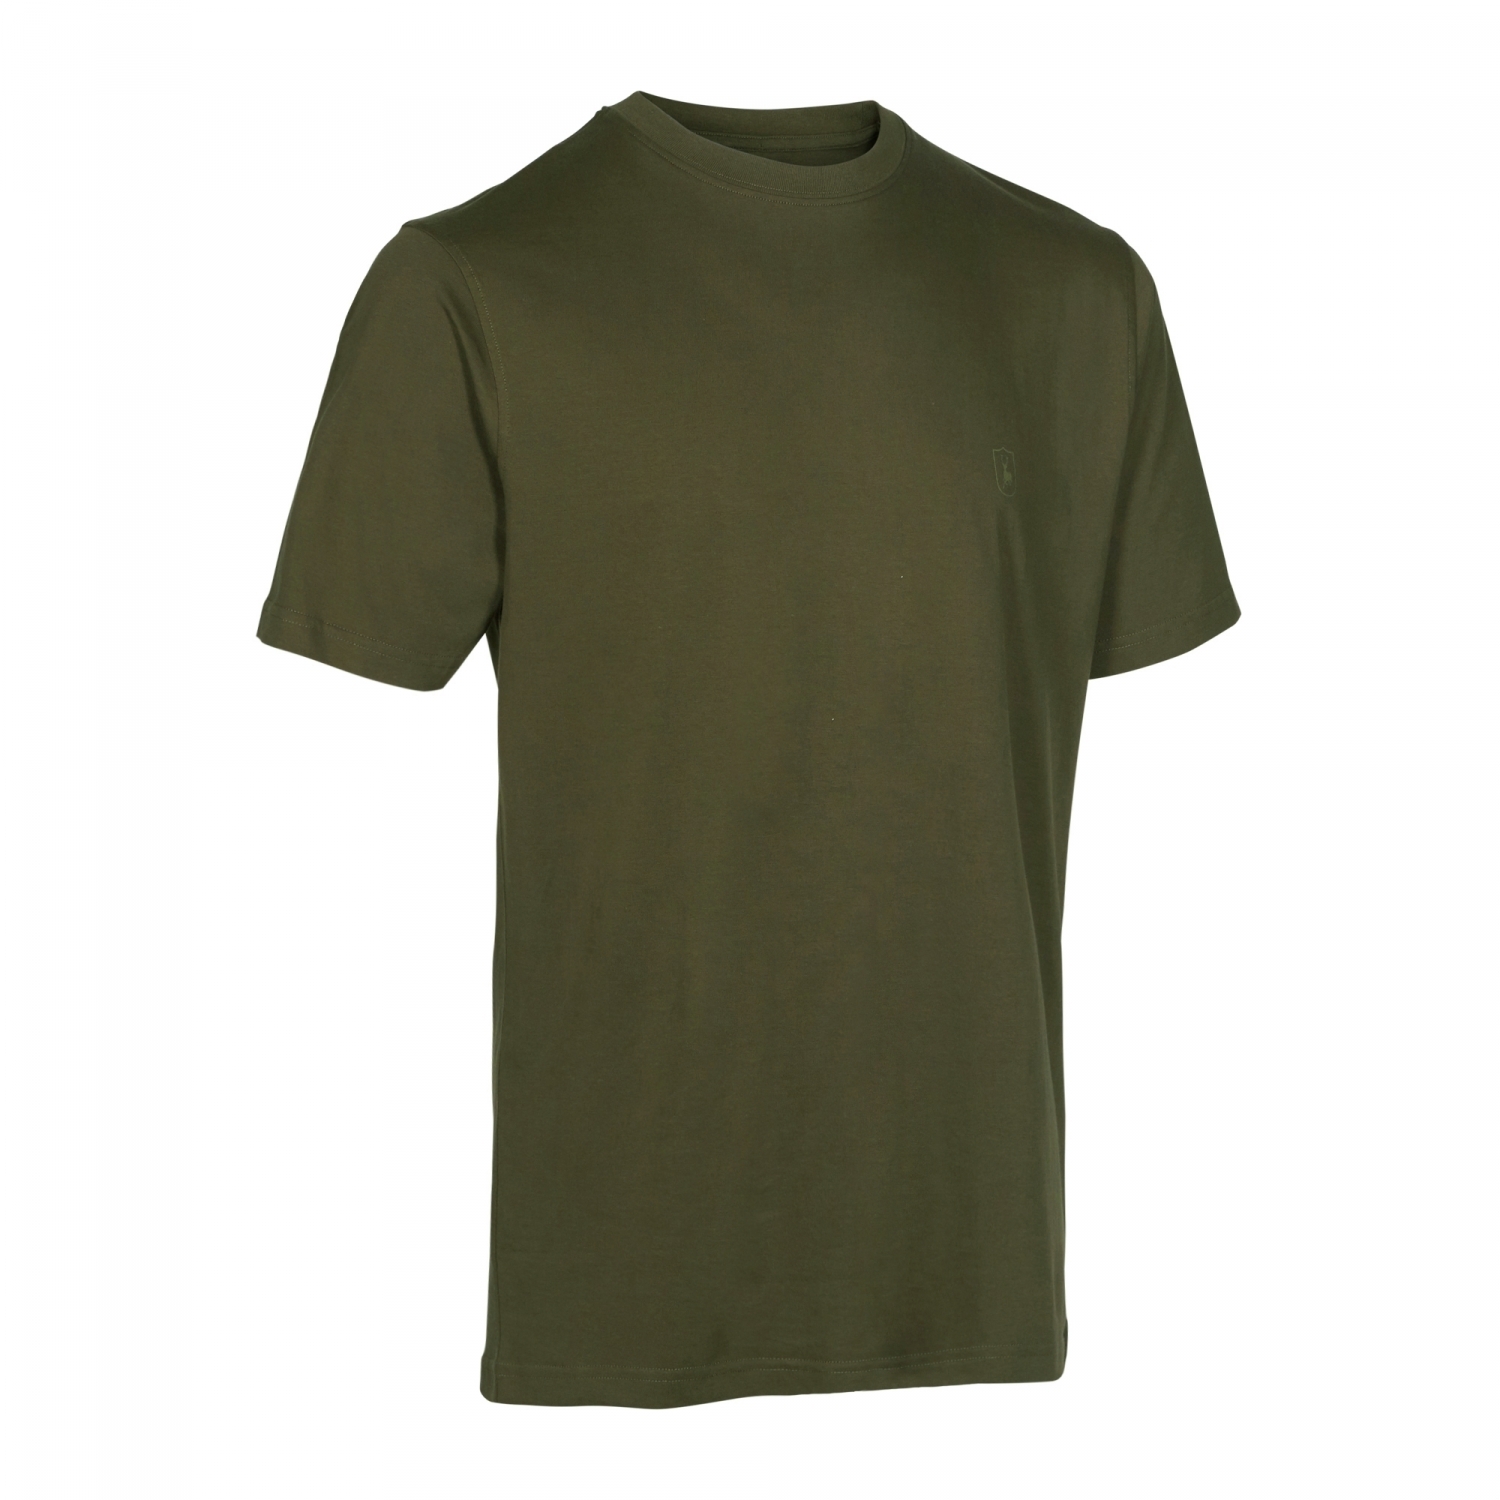 T-Shirt 2-Pack	 331-571 DH	Green/Brown	S